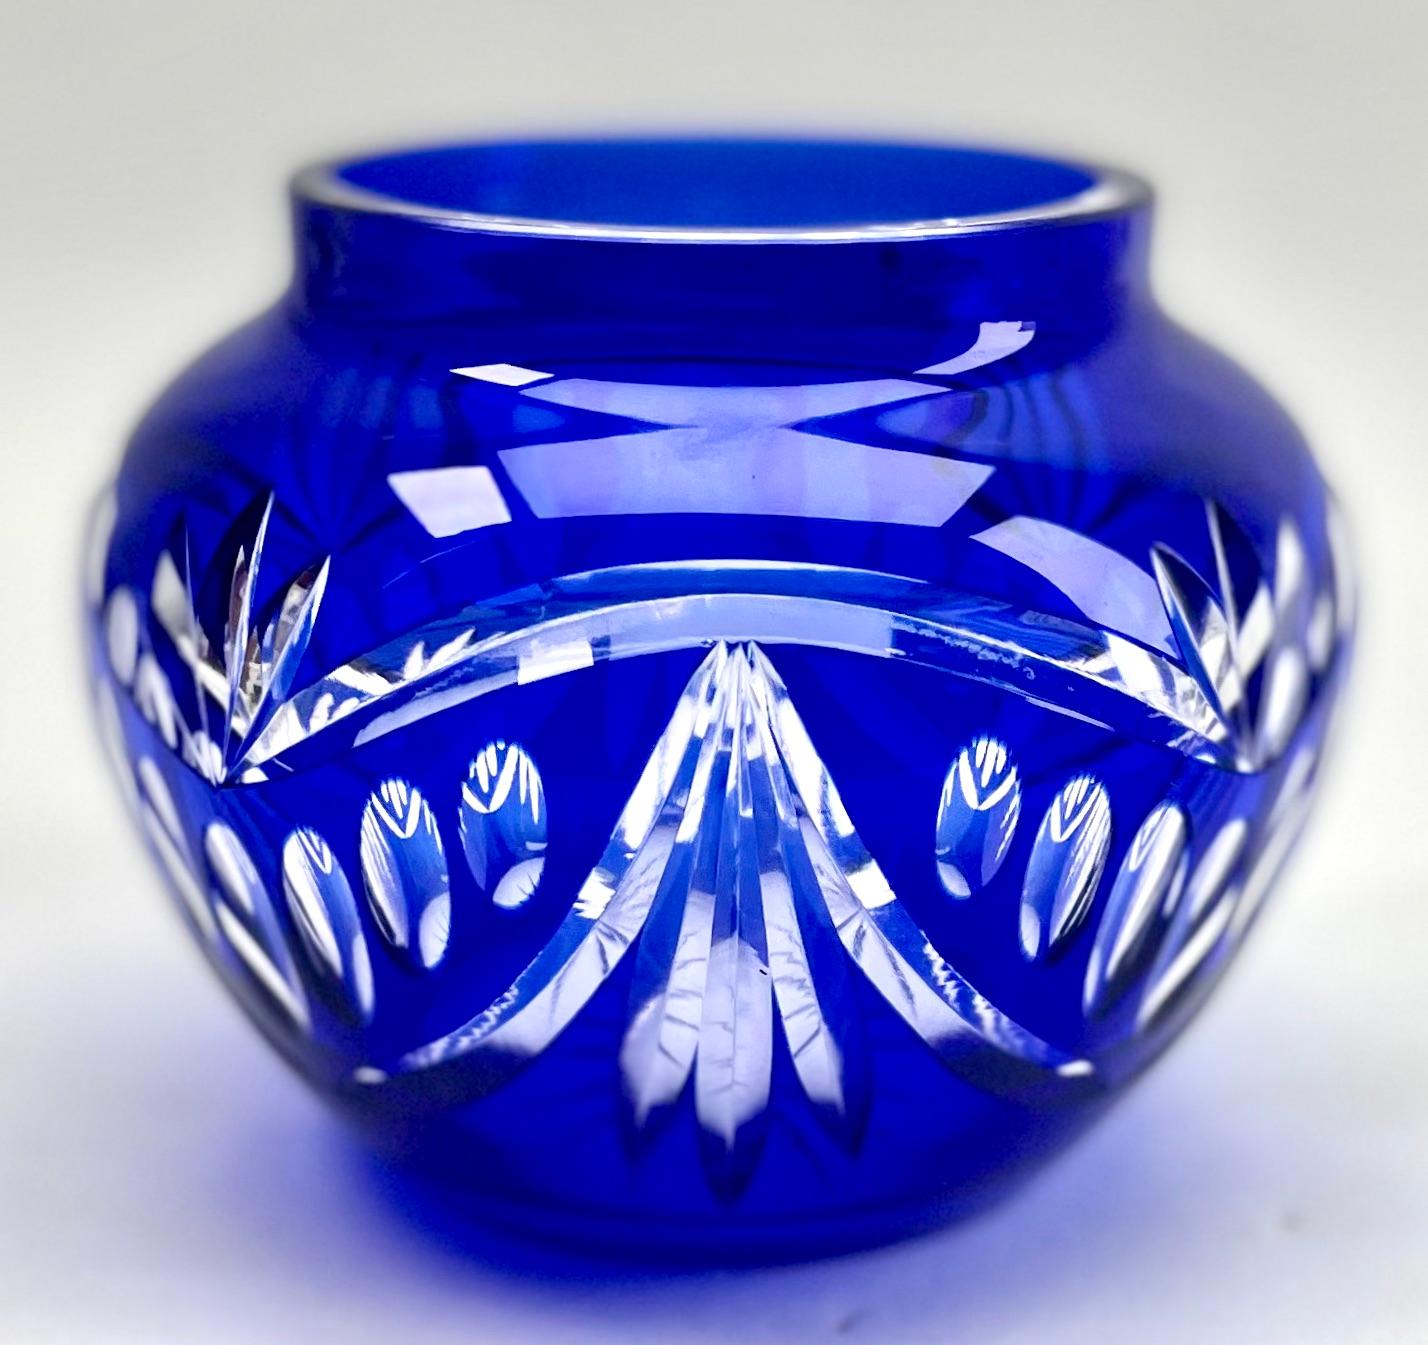 Mid-20th Century Val Saint Lambert Cobalt 'Pique Fleurs' Vase, Crystal Cut-to-Clear, with Grille